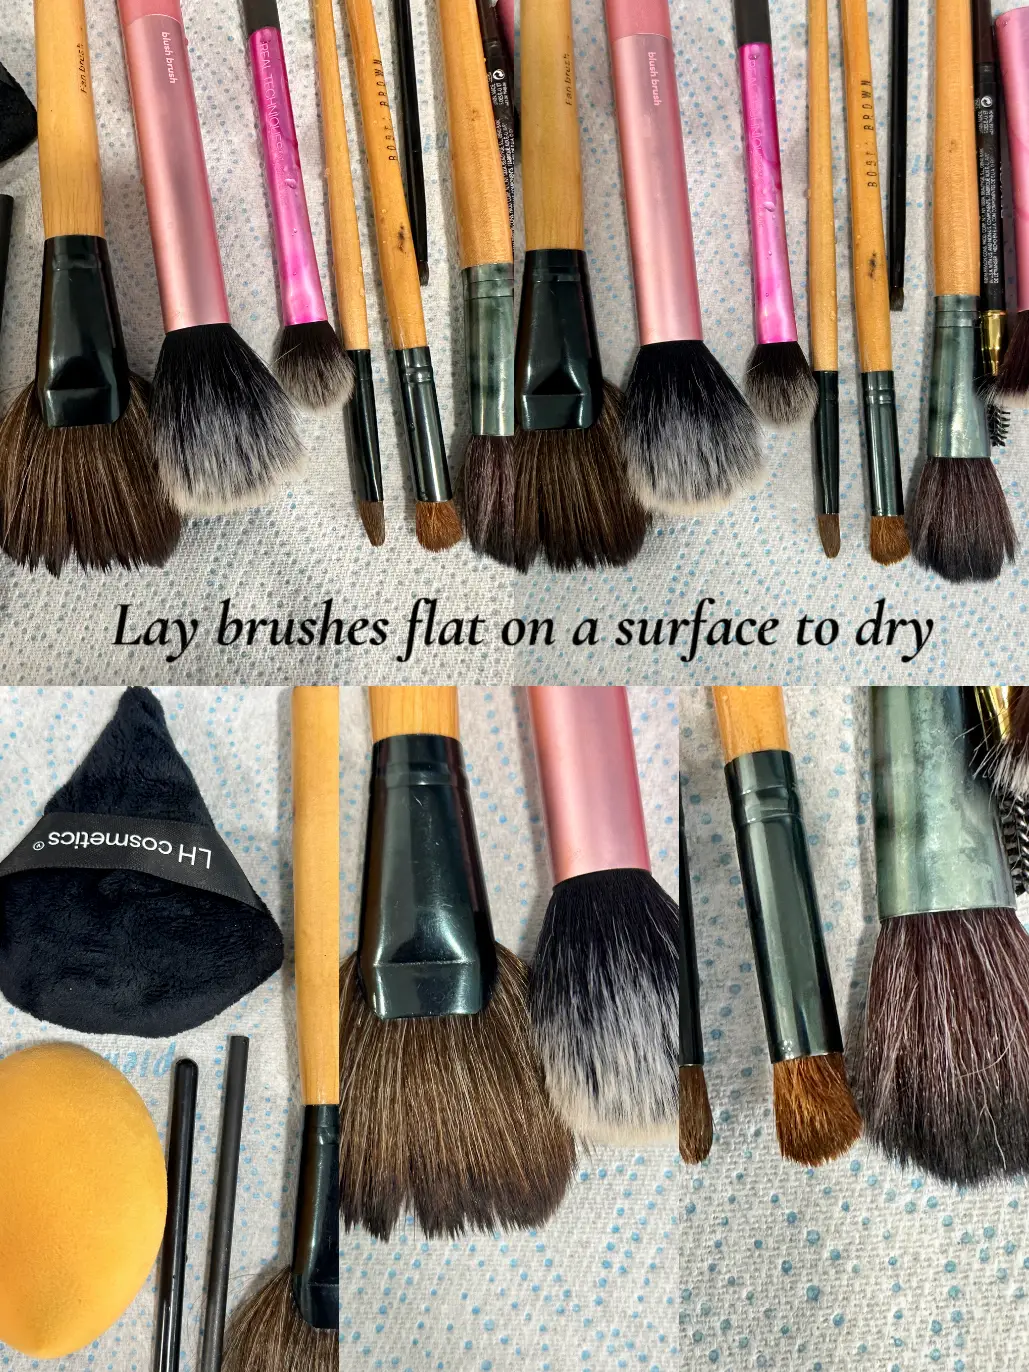 Properly Wash Your Makeup Brushes